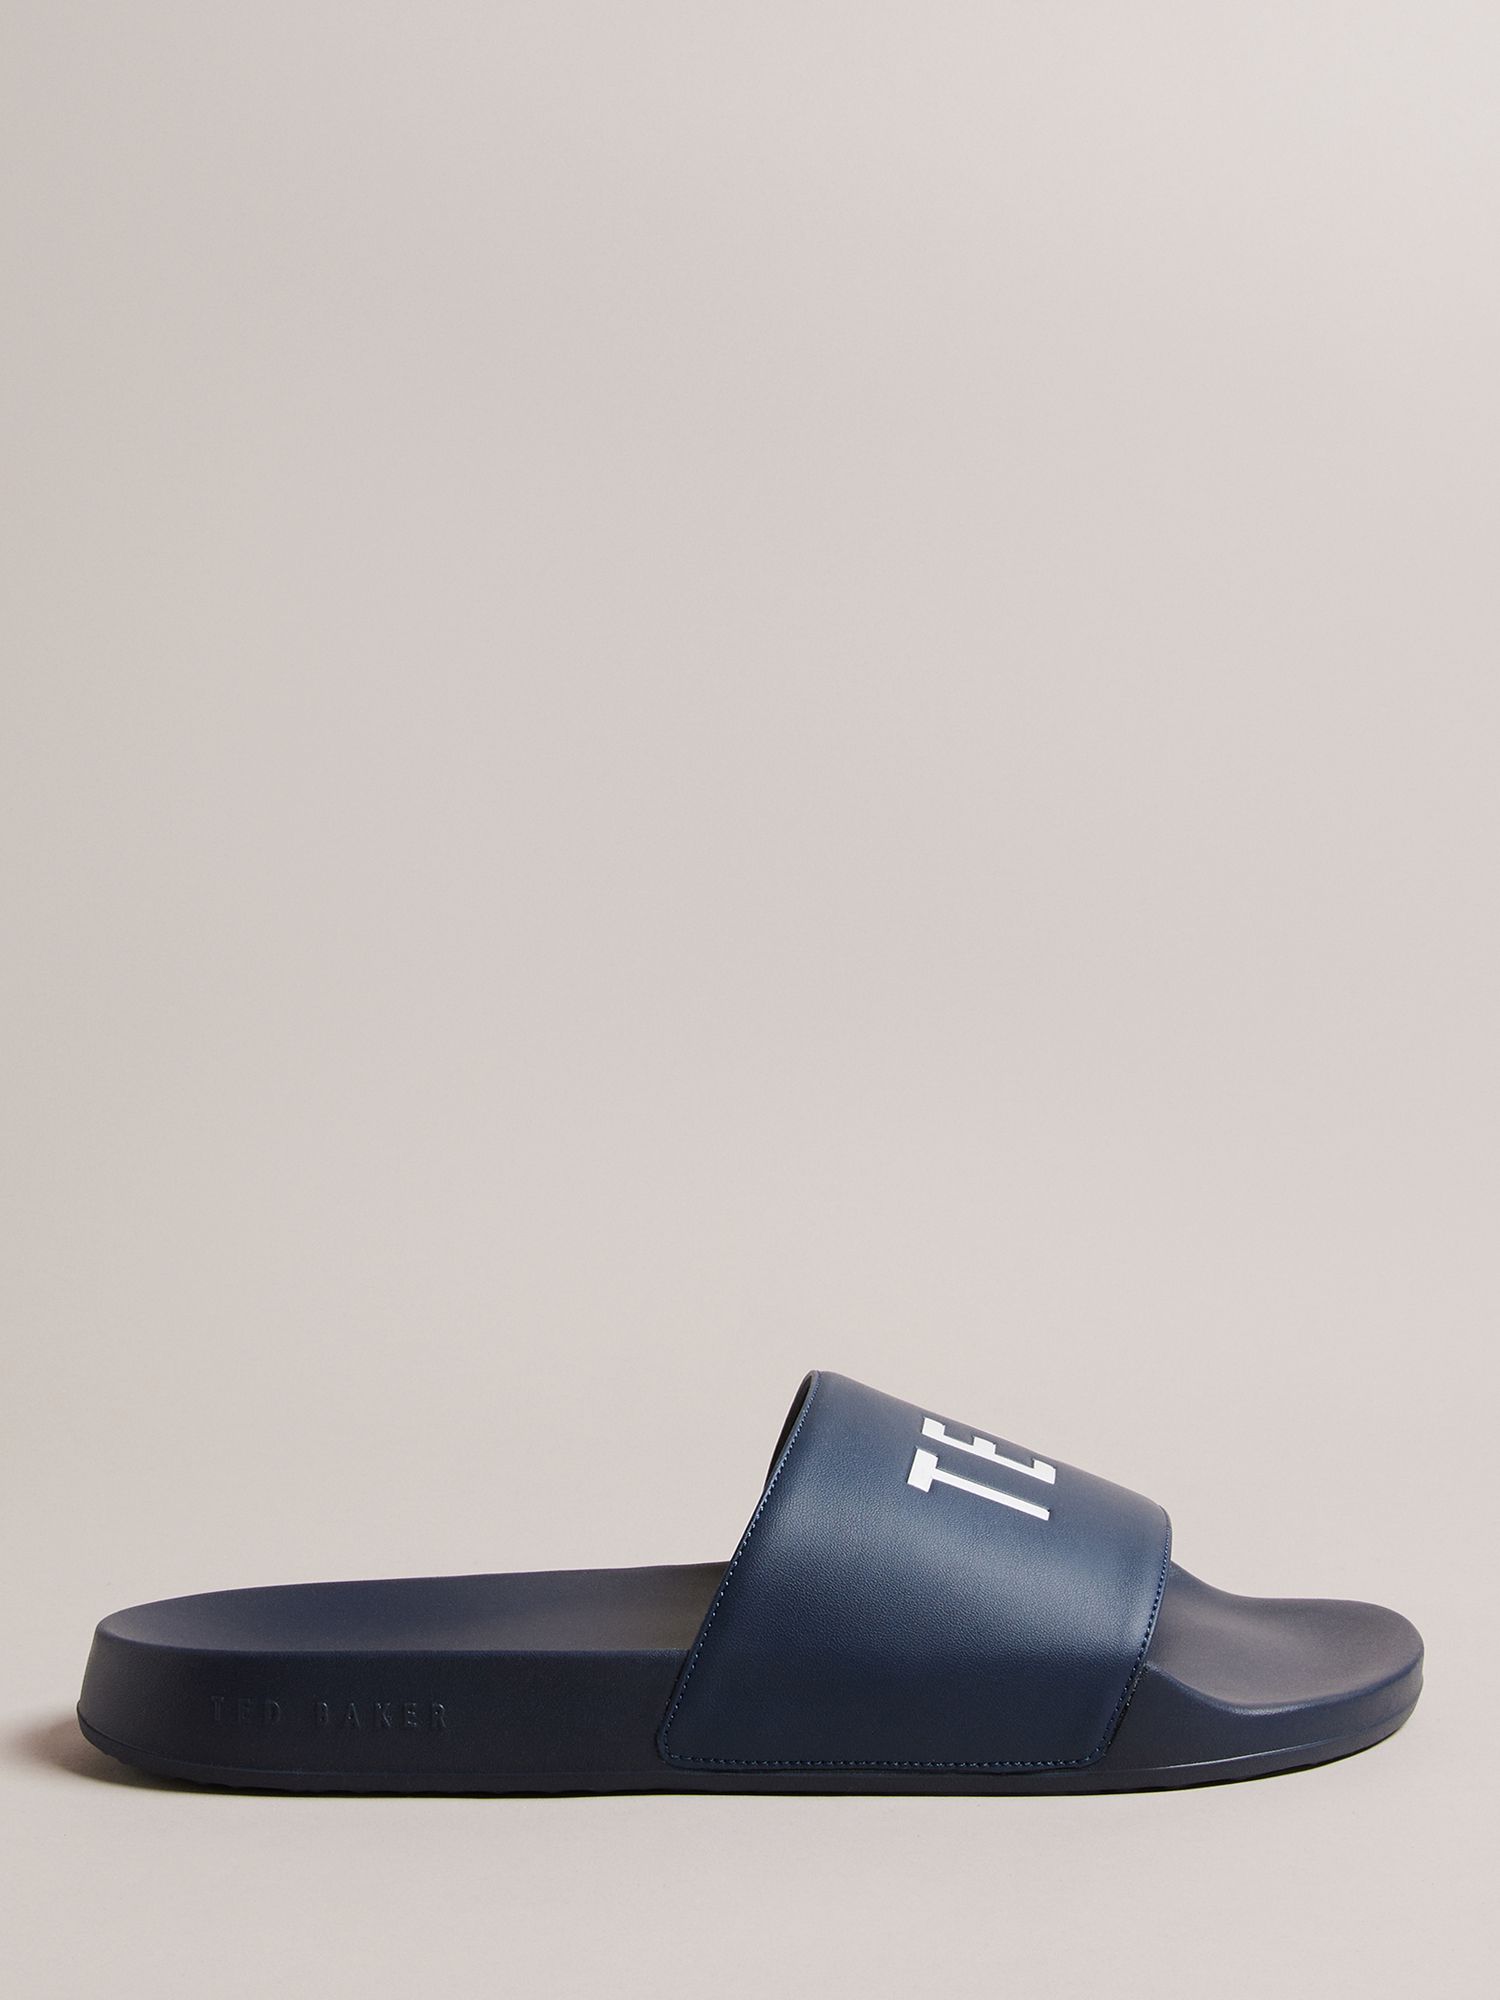 Ted Baker Auly Slider Sandals, Navy at John Lewis & Partners